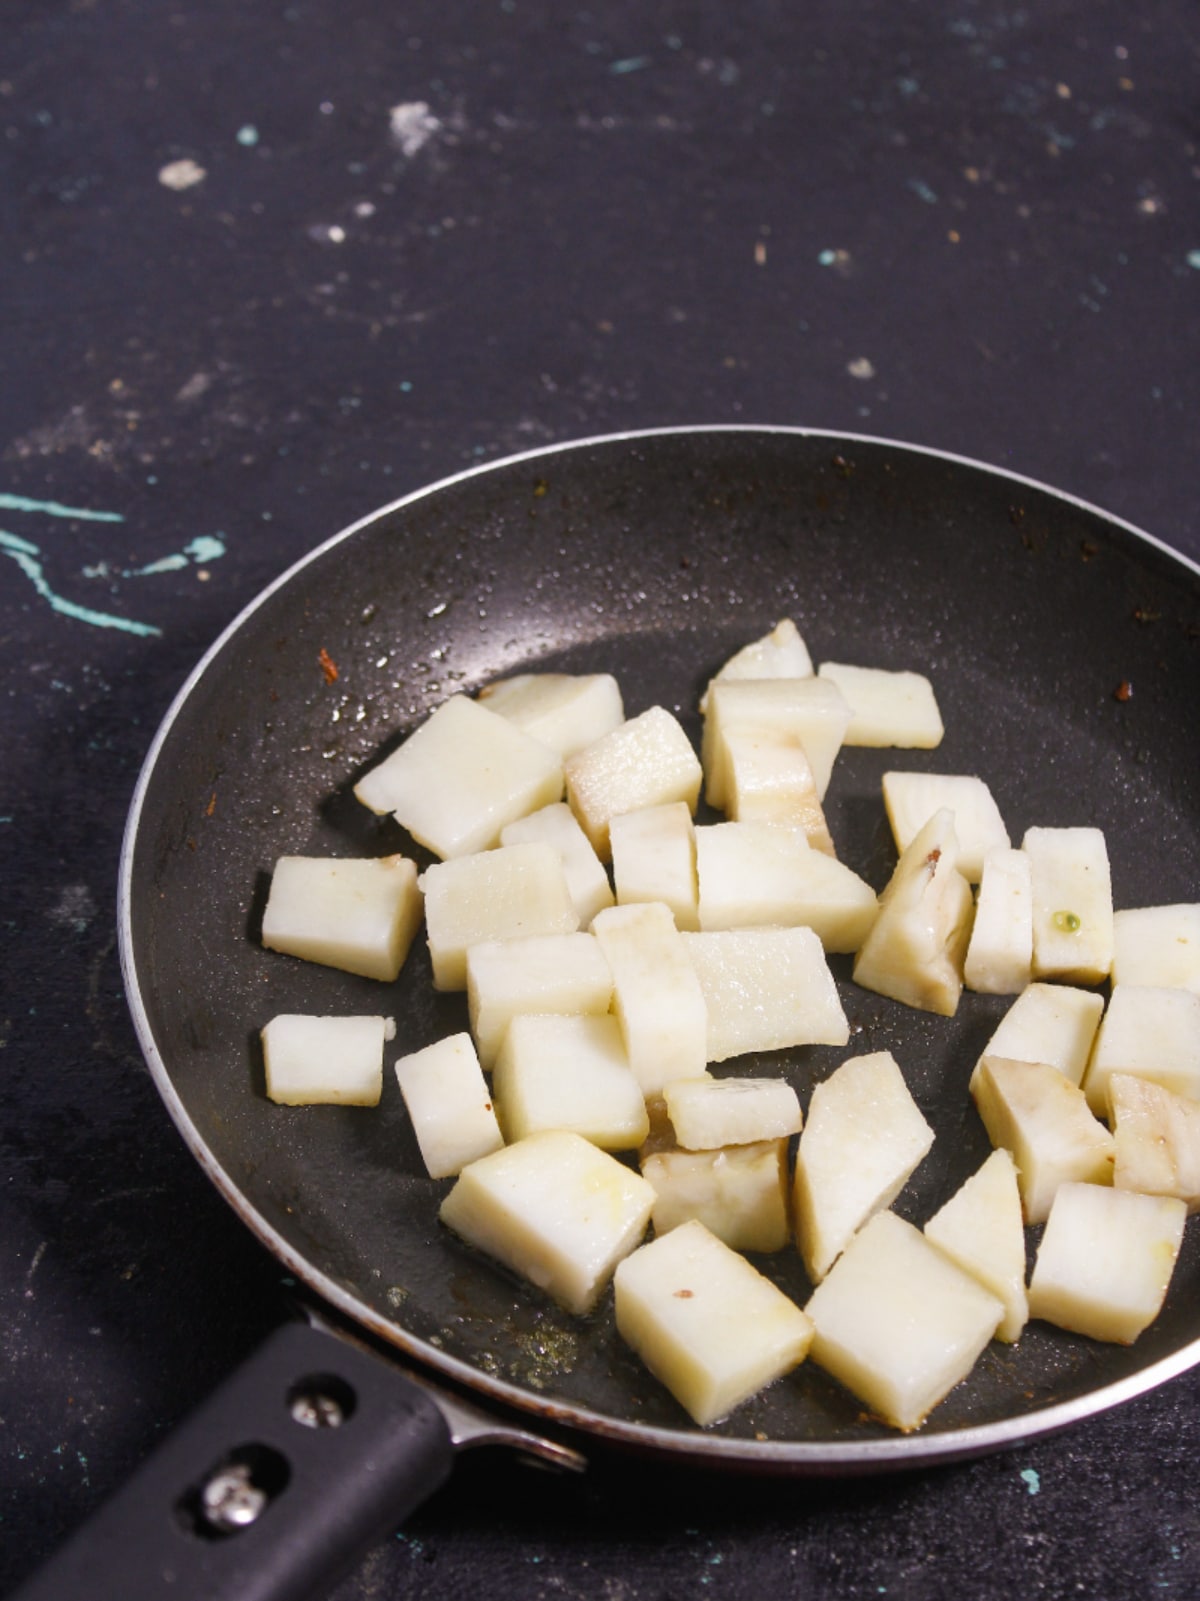 Add cubed potato in a pan and saute